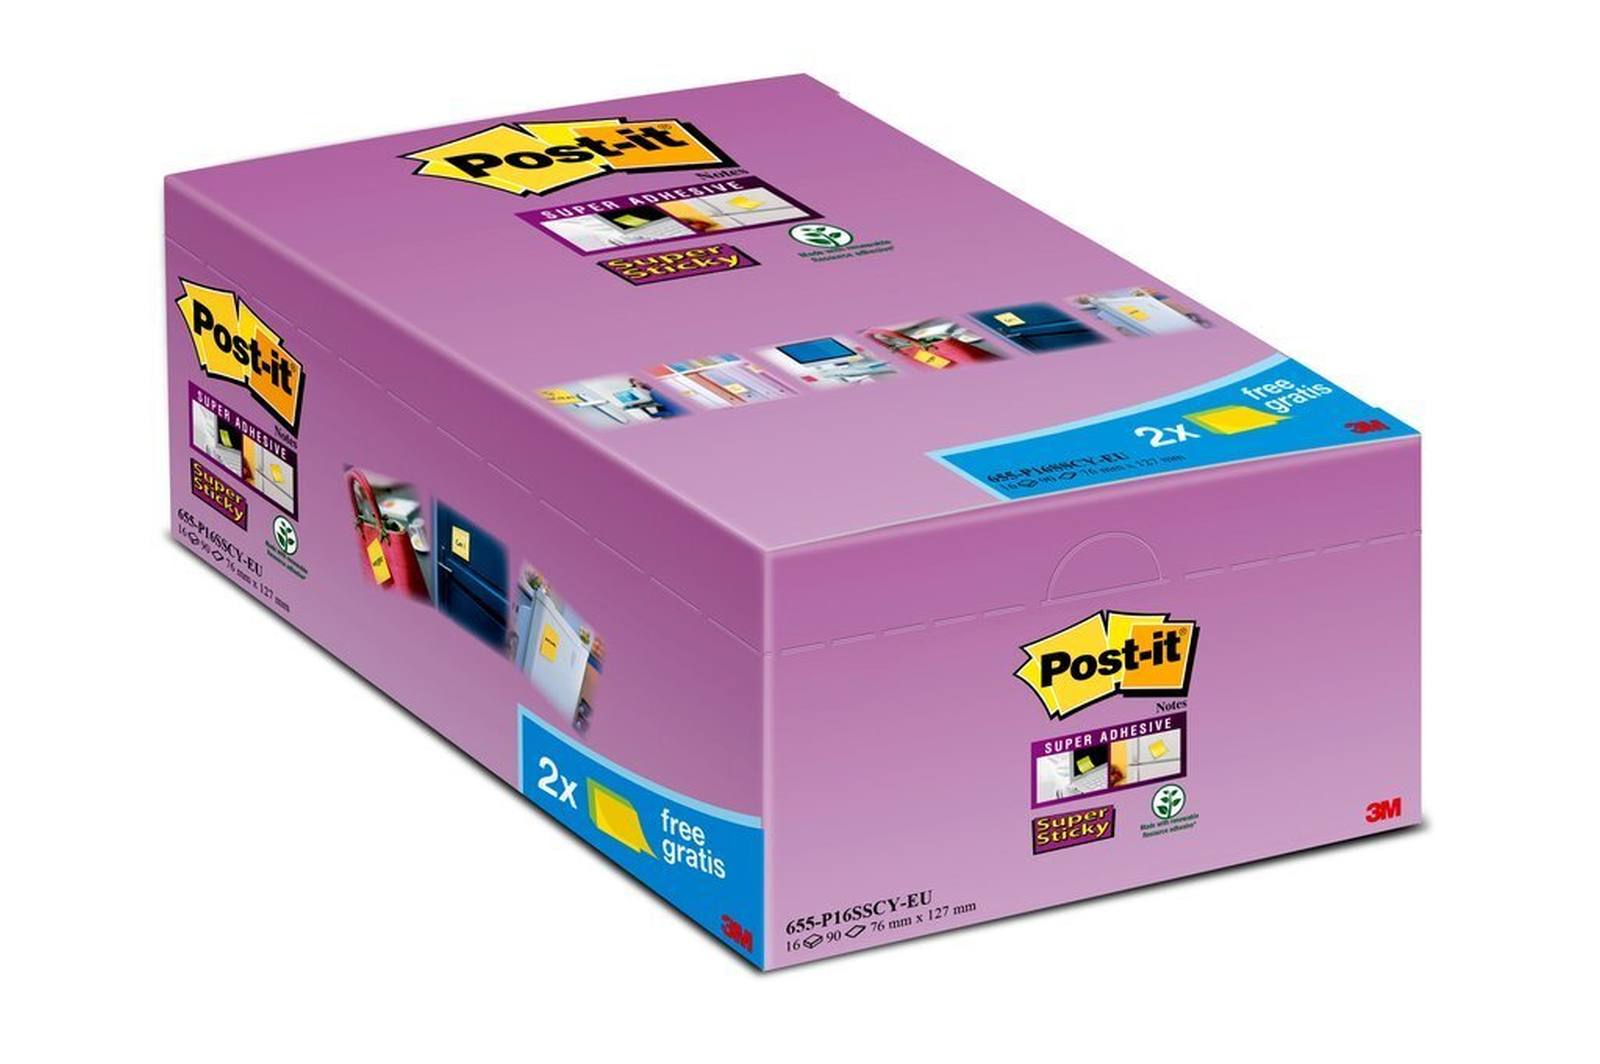 3M Post-it Super Sticky Notes 65516SYP, 127 mm x 76 mm, yellow, 16 pads of 90 sheets each